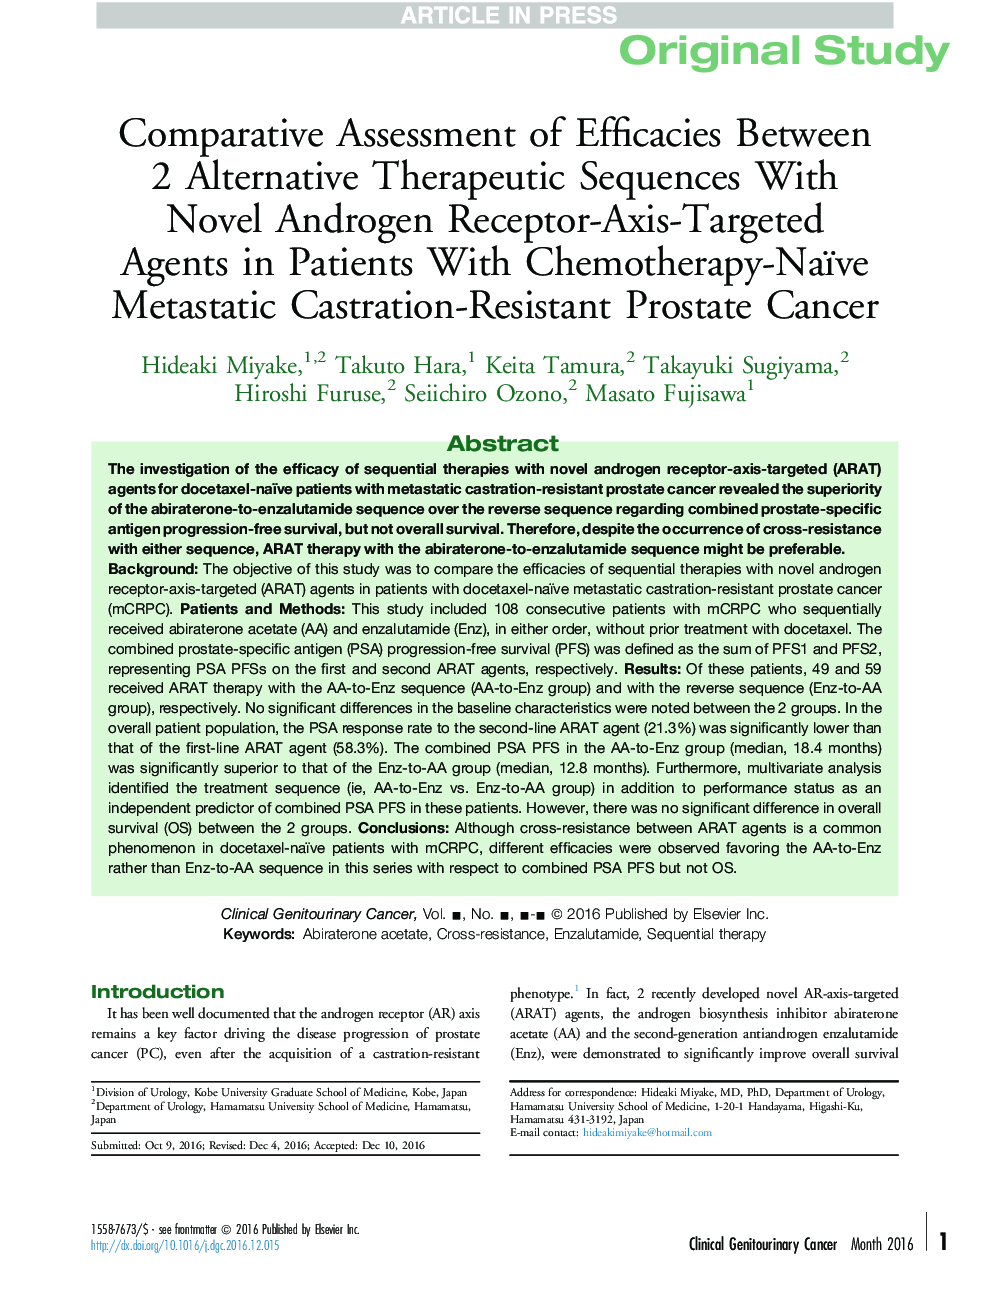 Comparative Assessment of Efficacies Between 2Â Alternative Therapeutic Sequences With NovelÂ Androgen Receptor-Axis-Targeted AgentsÂ in Patients With Chemotherapy-Naïve Metastatic Castration-Resistant Prostate Cancer